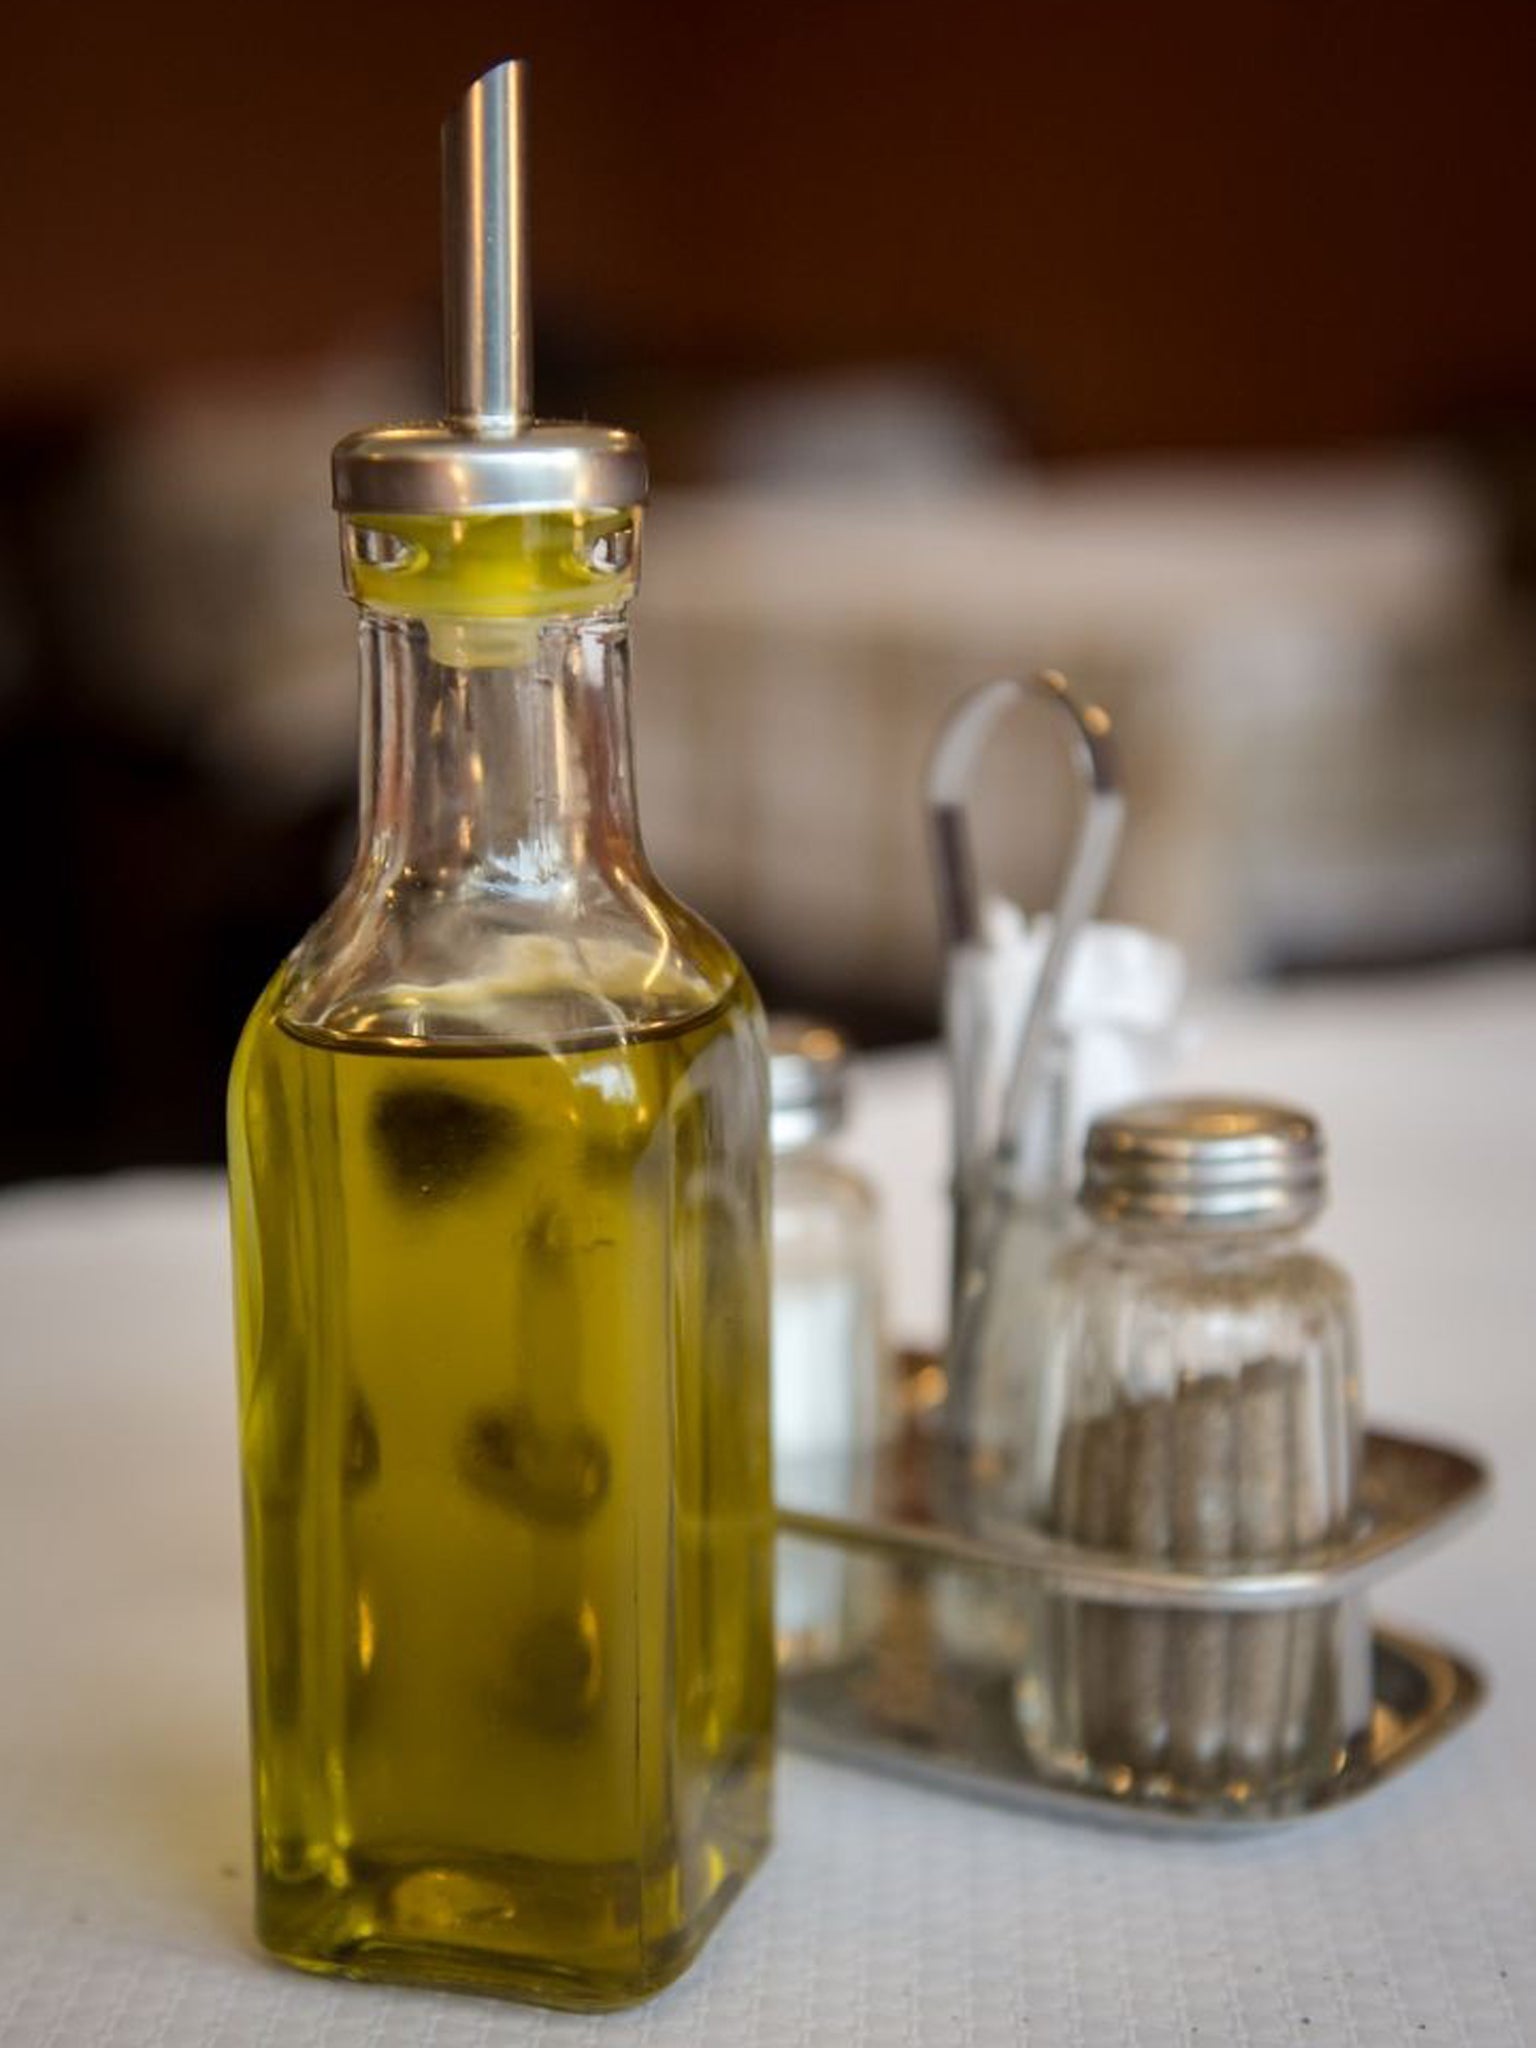 Refillable olive oil bottles will be banned in restaurants as of 2014